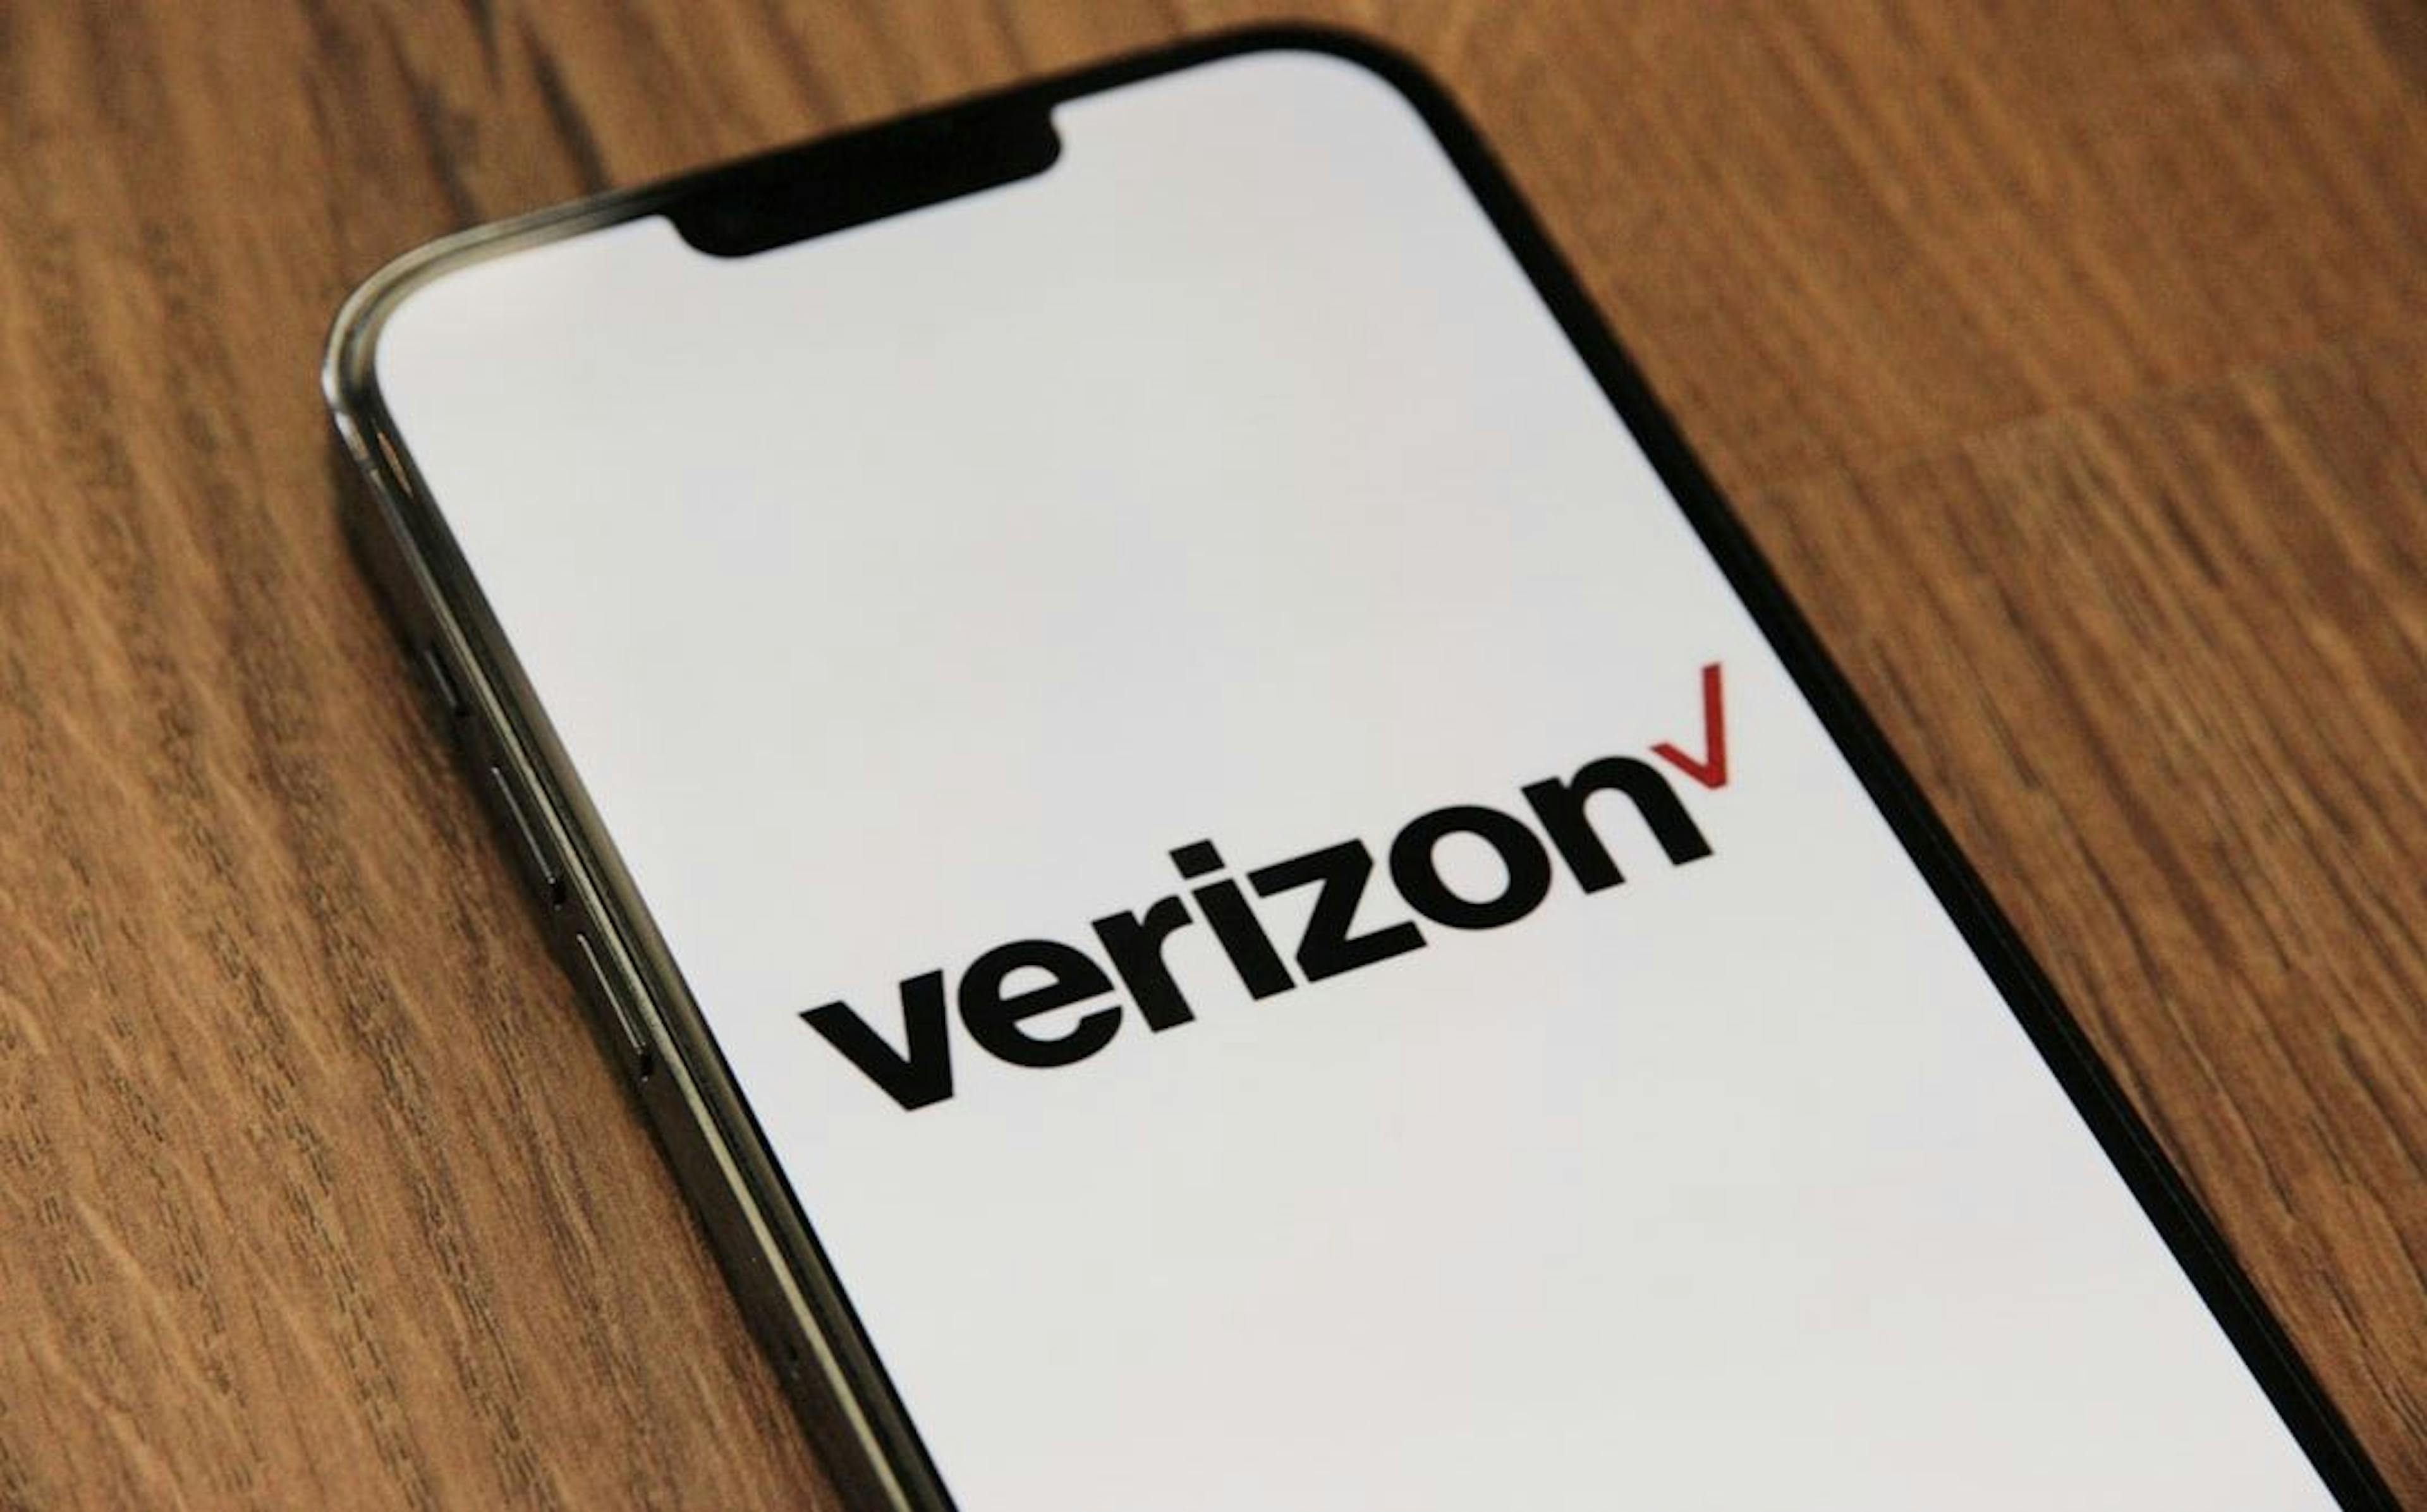 featured image - Verizon's New York Ties Come into Play in UMG's Copyright Infringement Suit